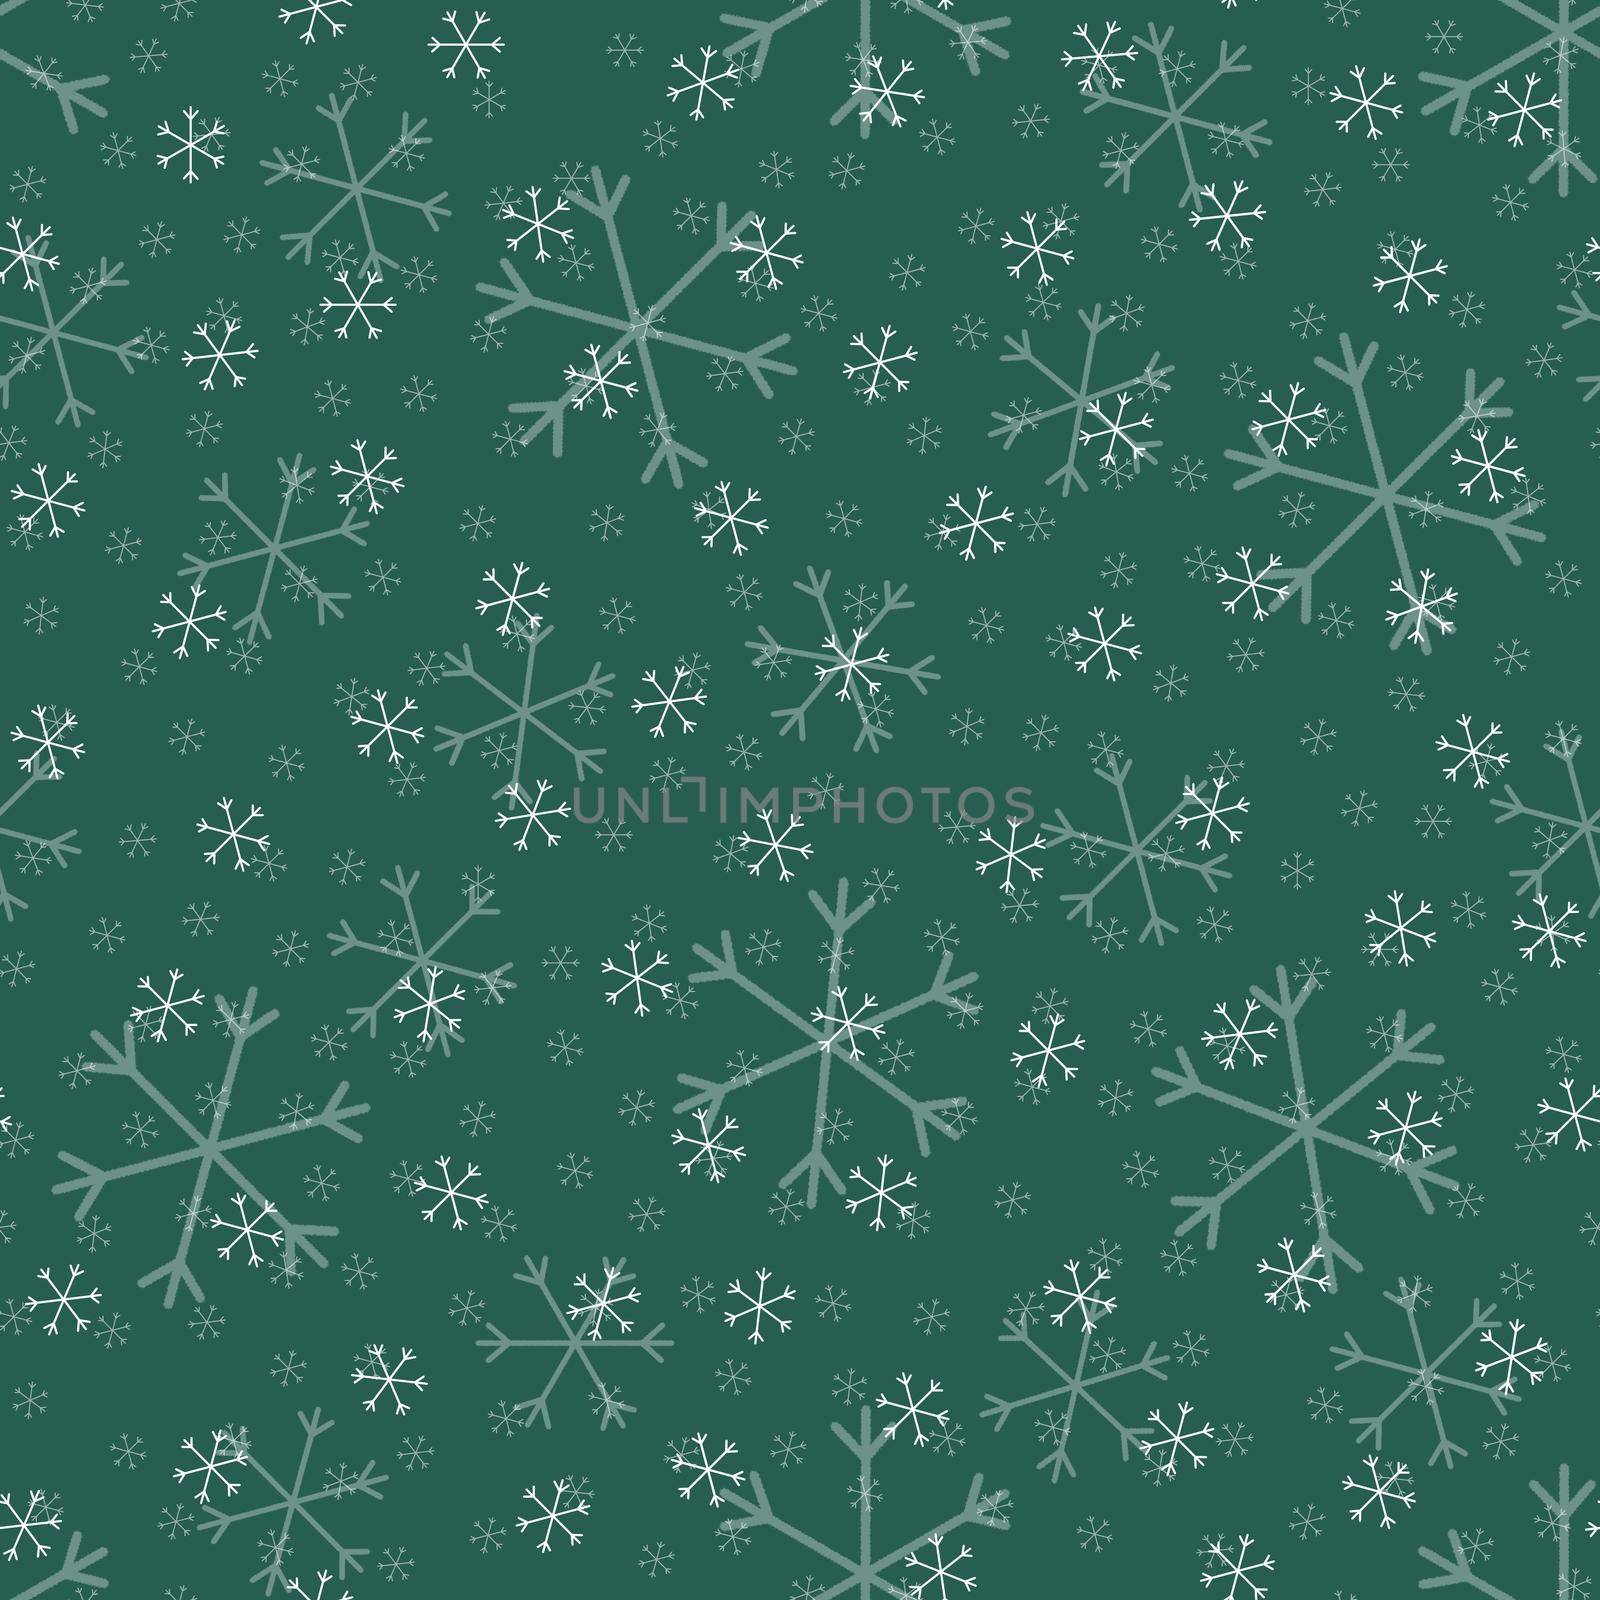 Seamless Christmas pattern doodle with hand random drawn snowflakes.Wrapping paper for presents, funny textile fabric print, design, decor, food wrap, backgrounds. new year.Raster copy.Green, white